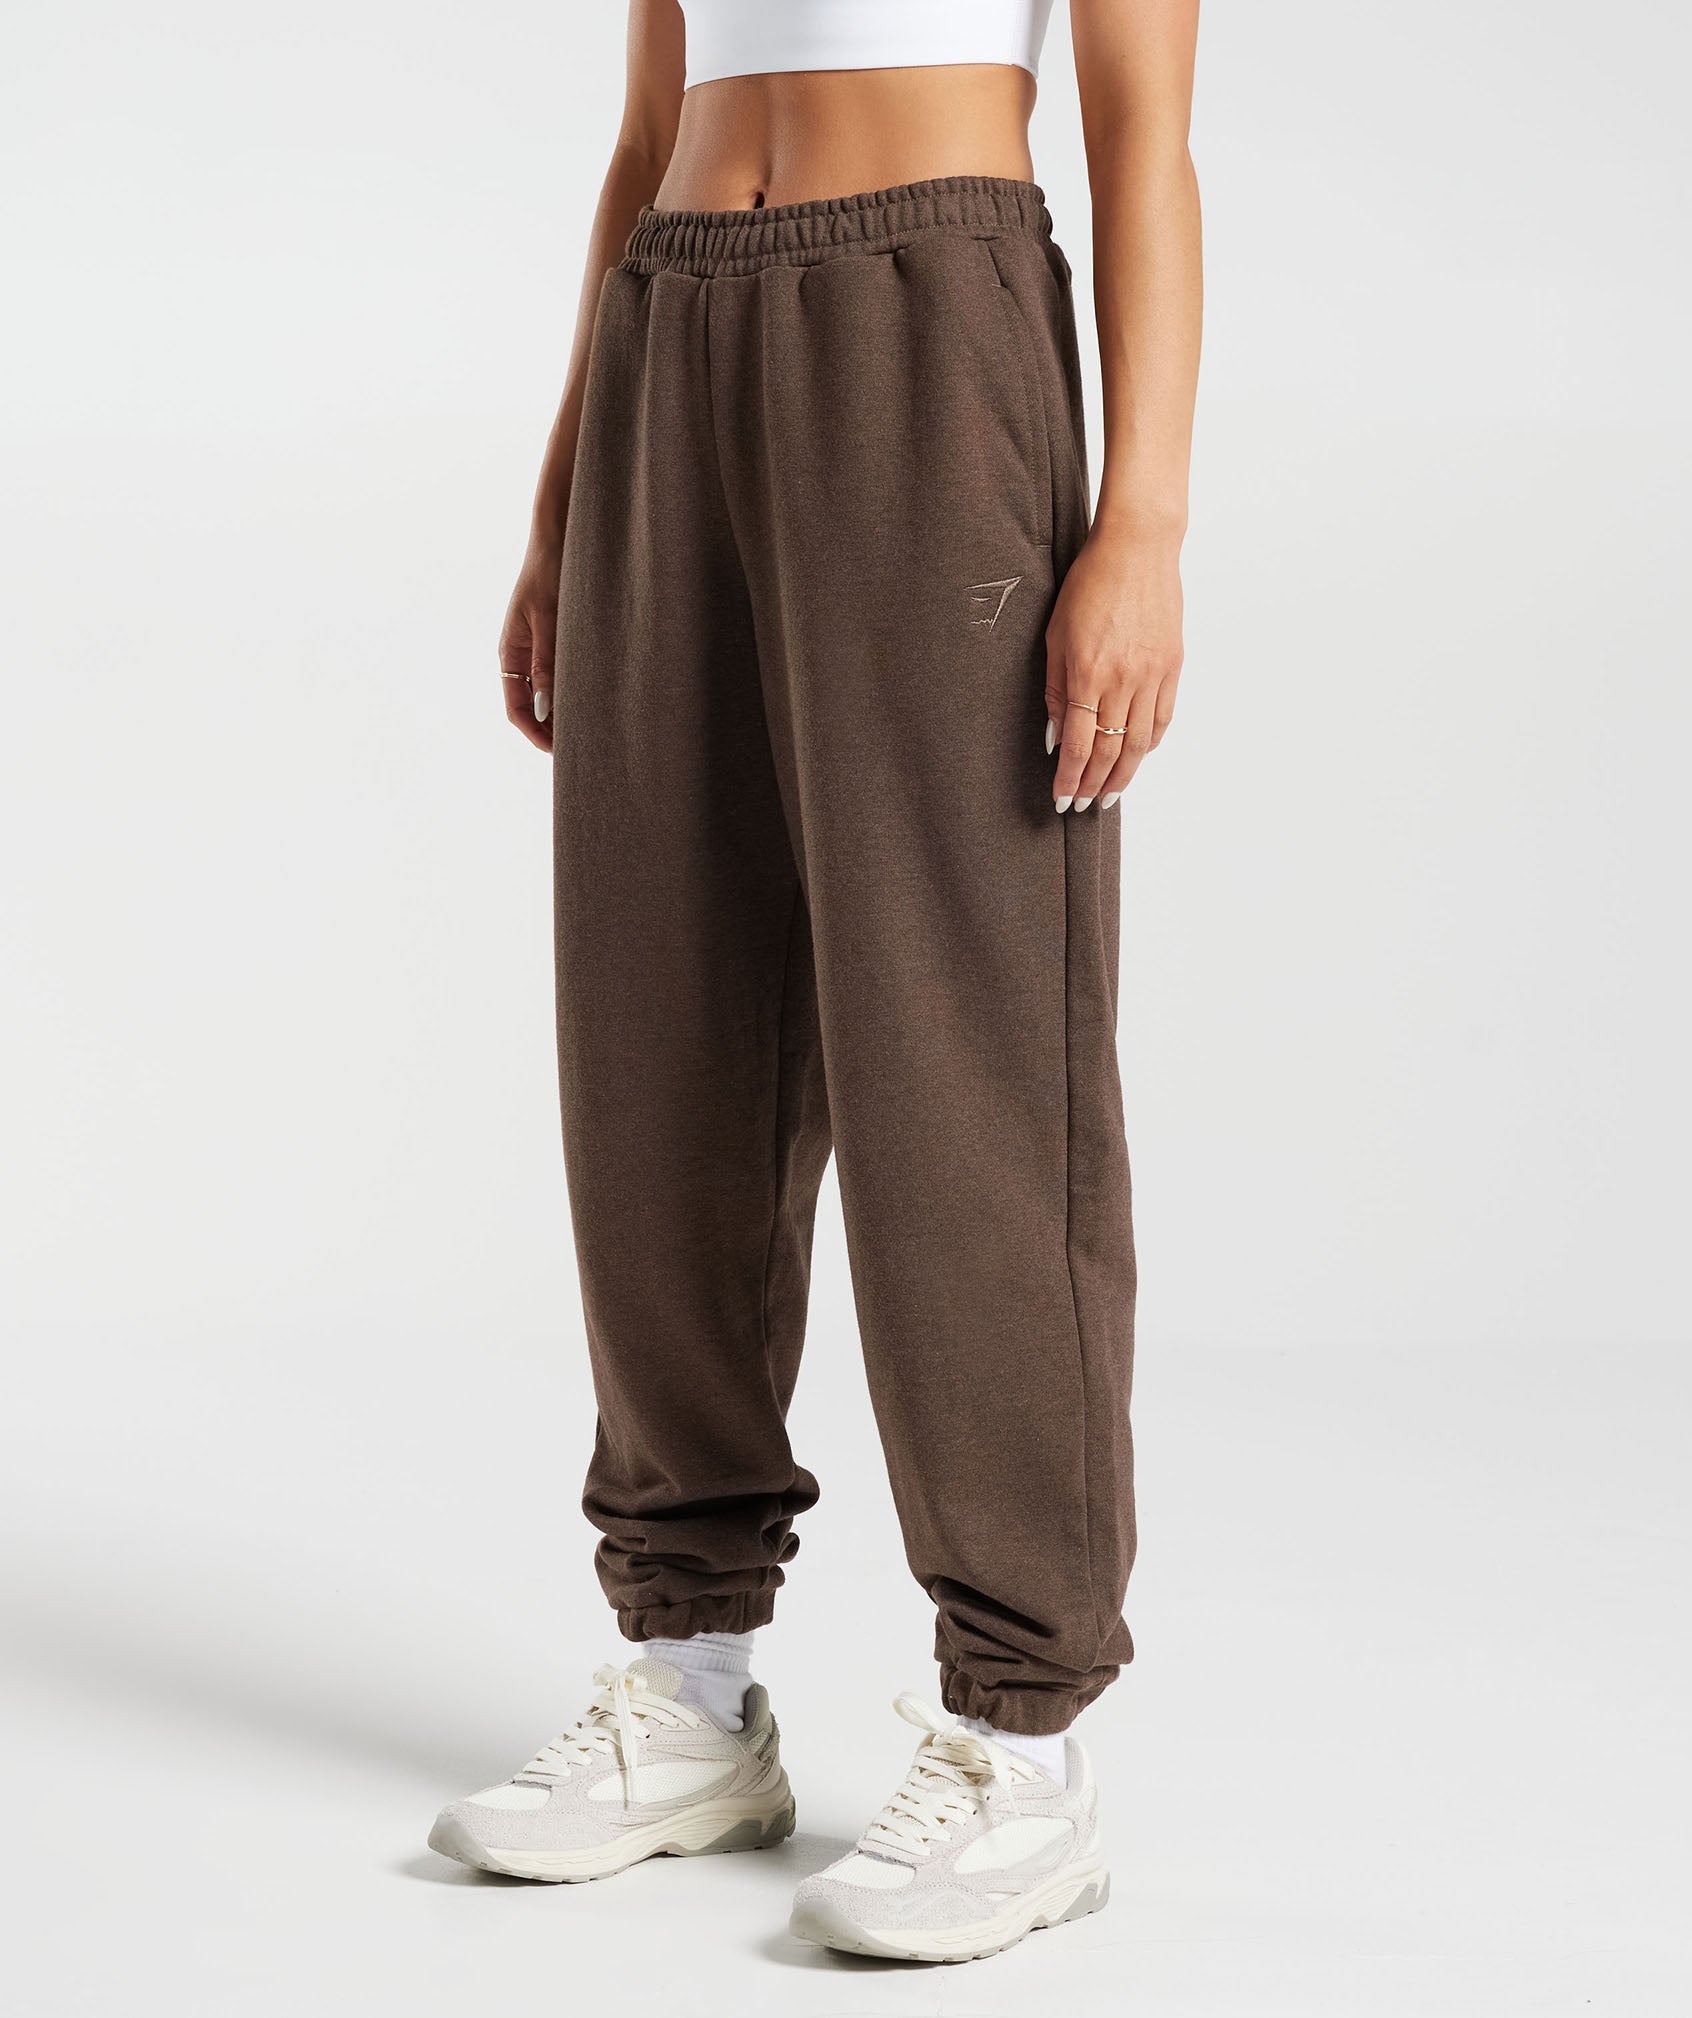 Rest Day Sweats Joggers in Cozy Brown Marl - view 3